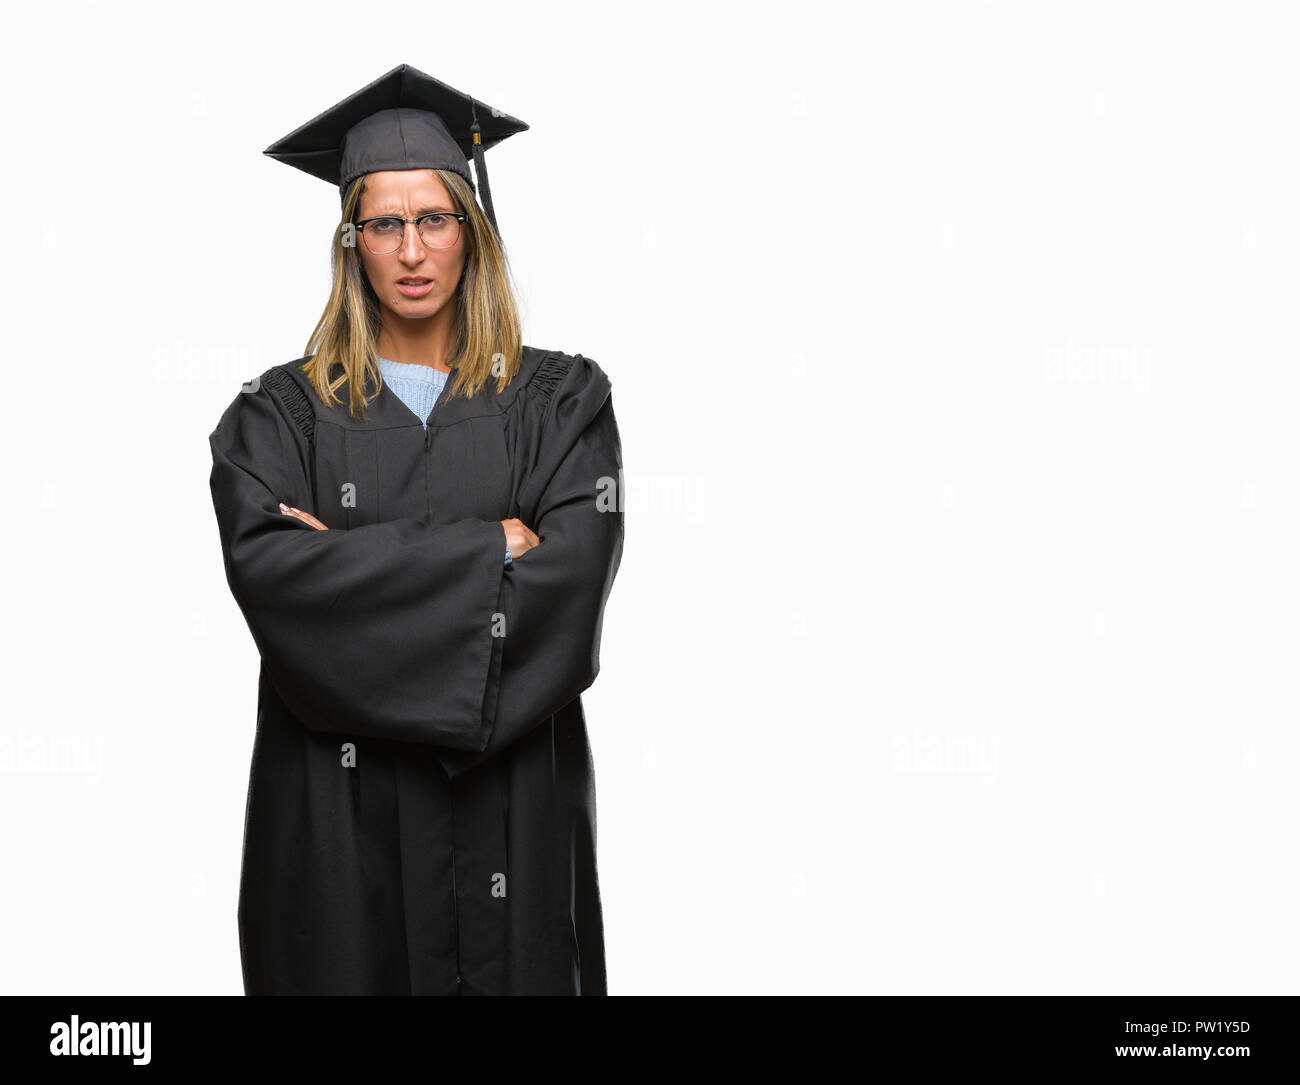 Young beautiful woman wearing graduated uniform over isolated background skeptic and nervous, disapproving expression on face with crossed arms. Negat Stock Photo